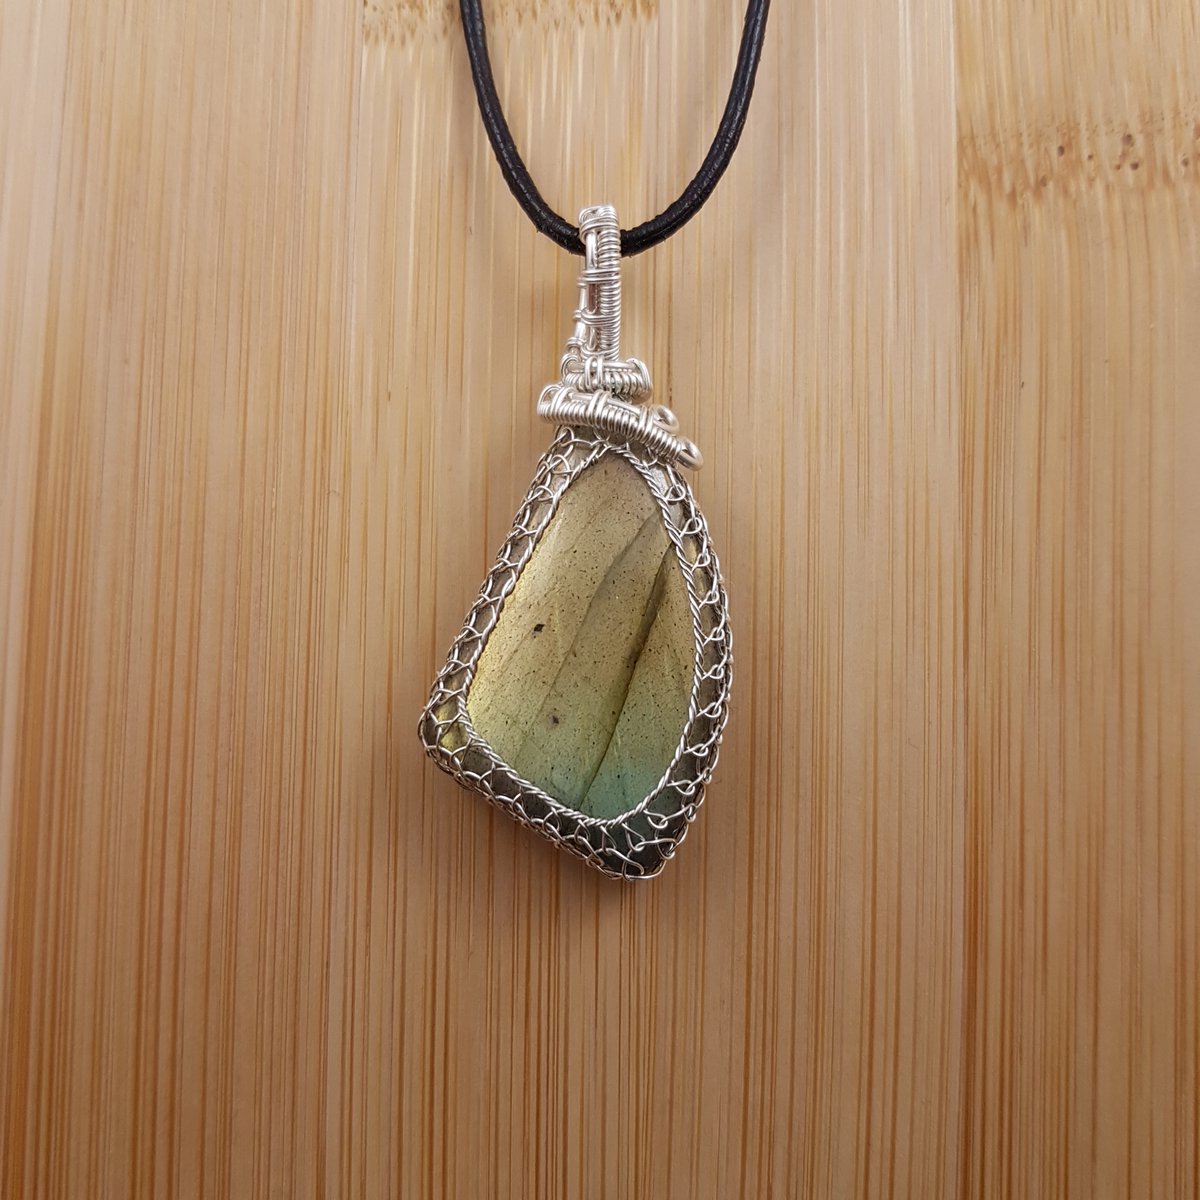 I'll wrap up the week here, before I go through every soul in the store.There are 27 labradorite pendants to choose from, and I need your help finding them homes:  https://www.etsy.com/shop/oishiny/?section_id=28088202Free international shipping included. #Halloween  #EtsyShop  #ShopIndie  #SmallBiz